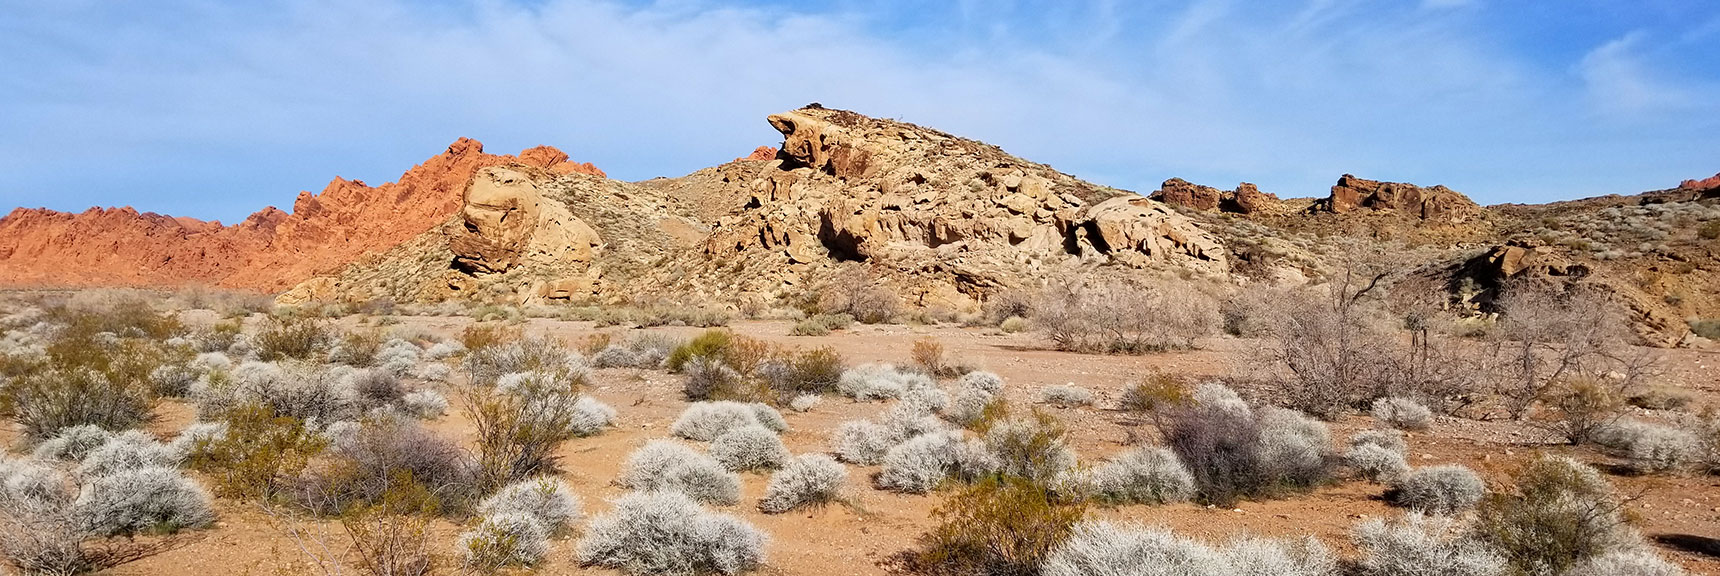 Rock Formations in the Eastern Area Wash on Old Arrowhead Trail in Valley of Fire State Park, Nevada